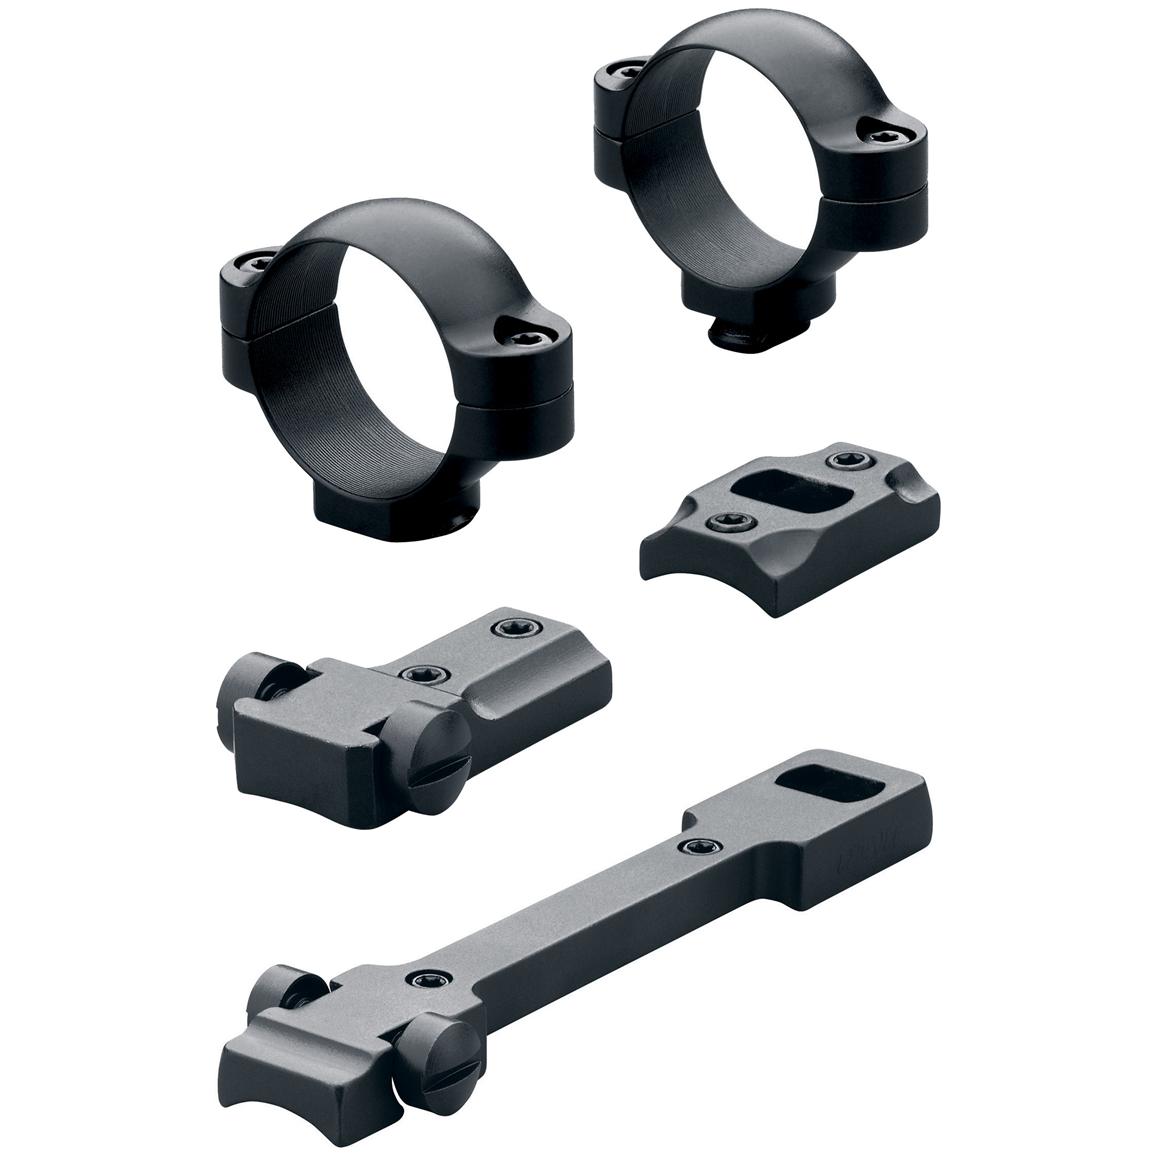 Leupold Rifle Scope Rings 300792, Rings & Mounts at Sportsman's Guide